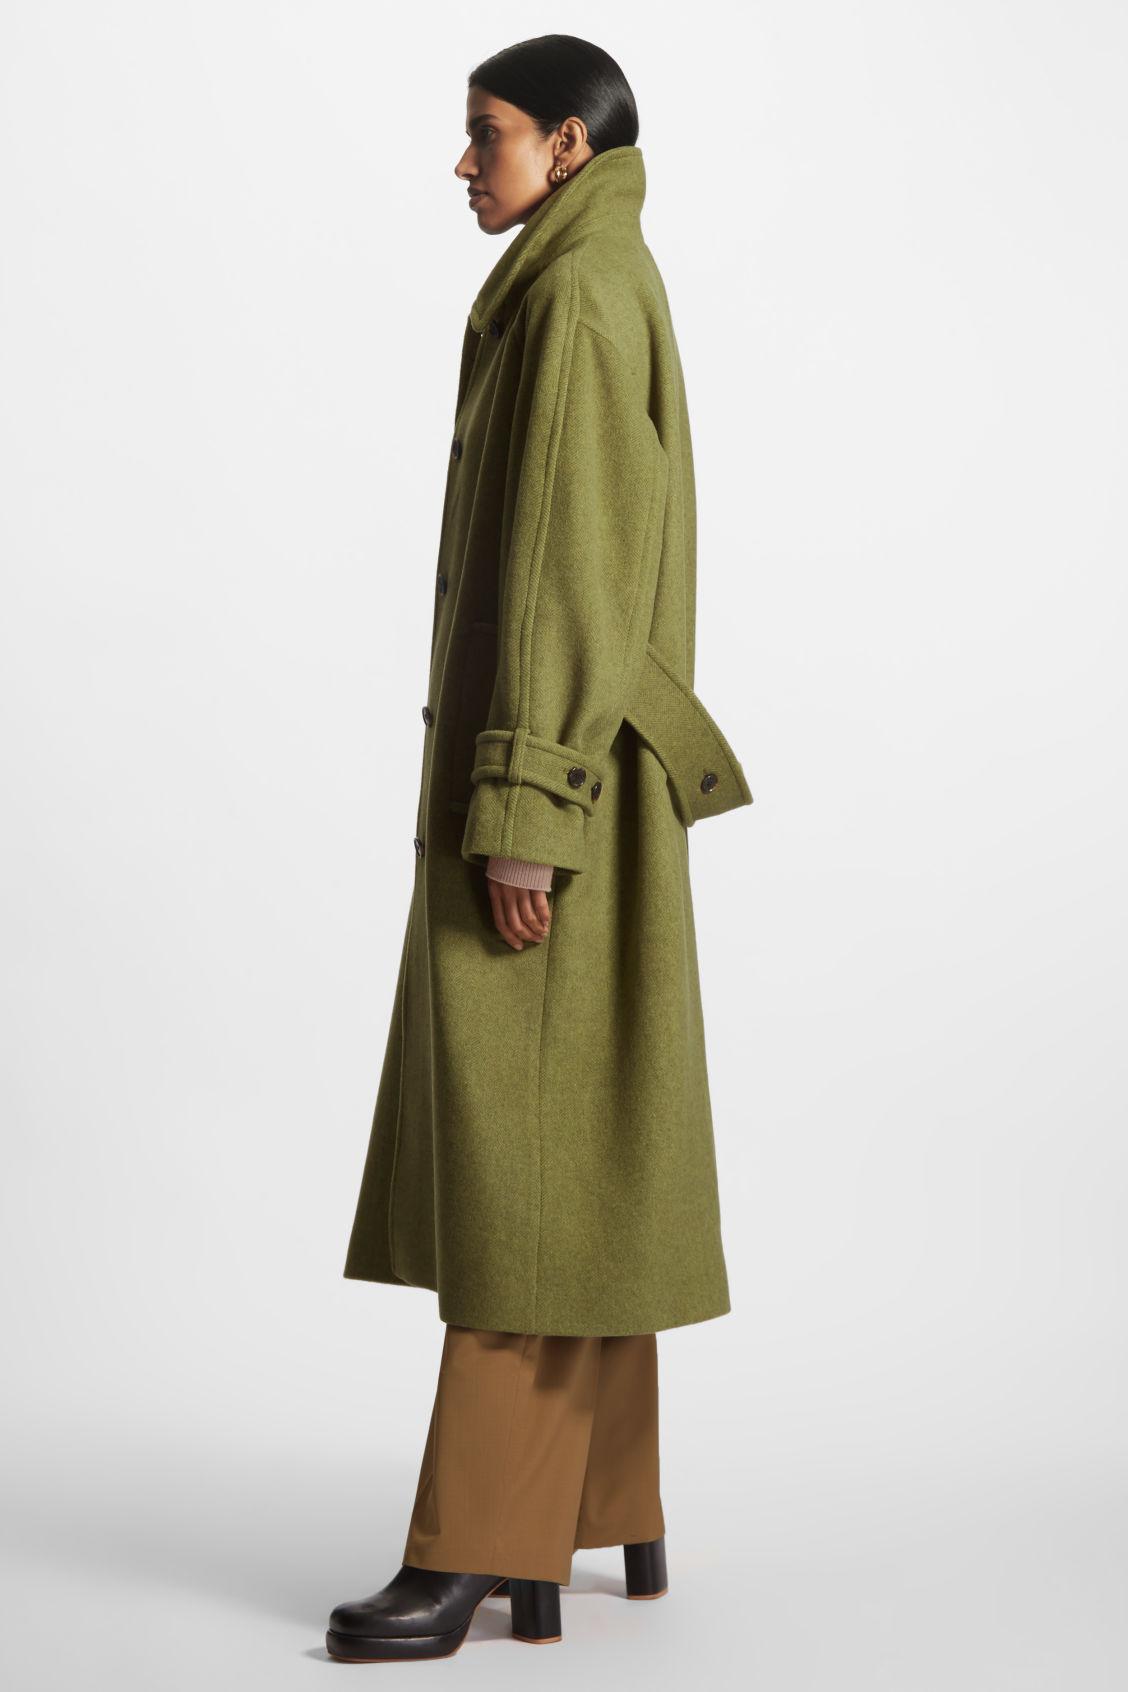 COS Wool-blend Tailored Coat in Green | Lyst